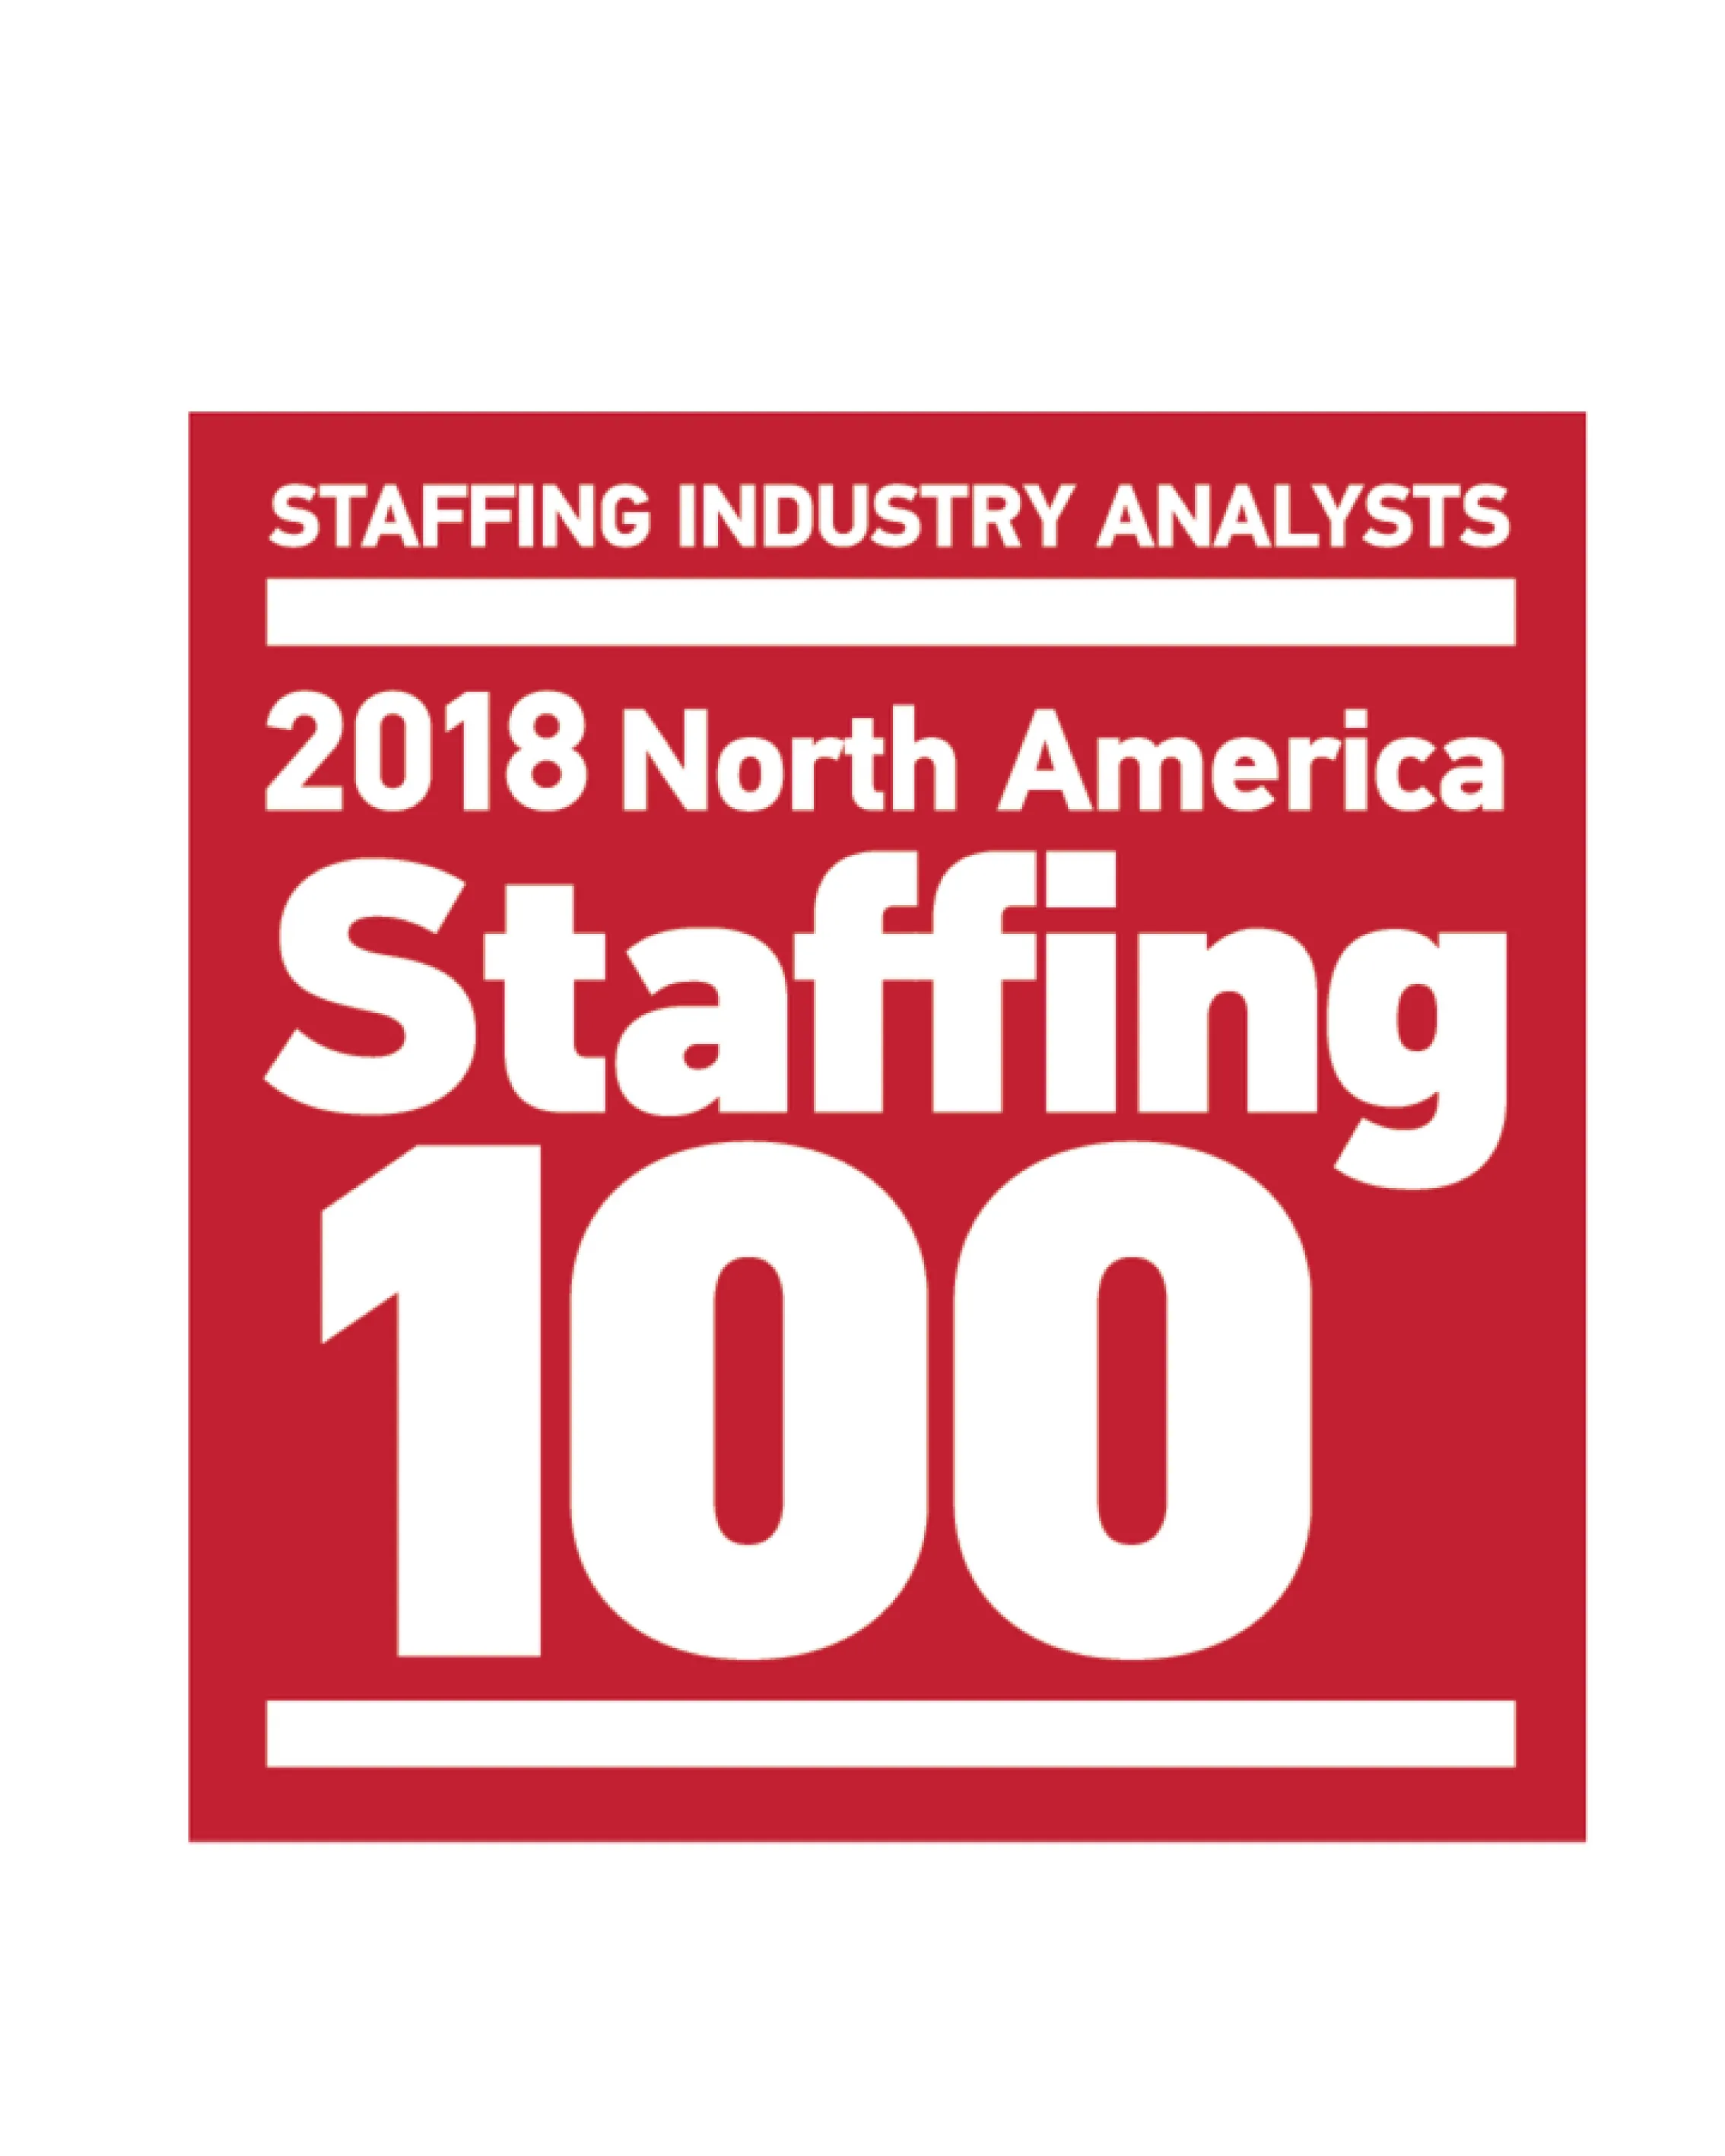 Top 100 staffing firms in North America.